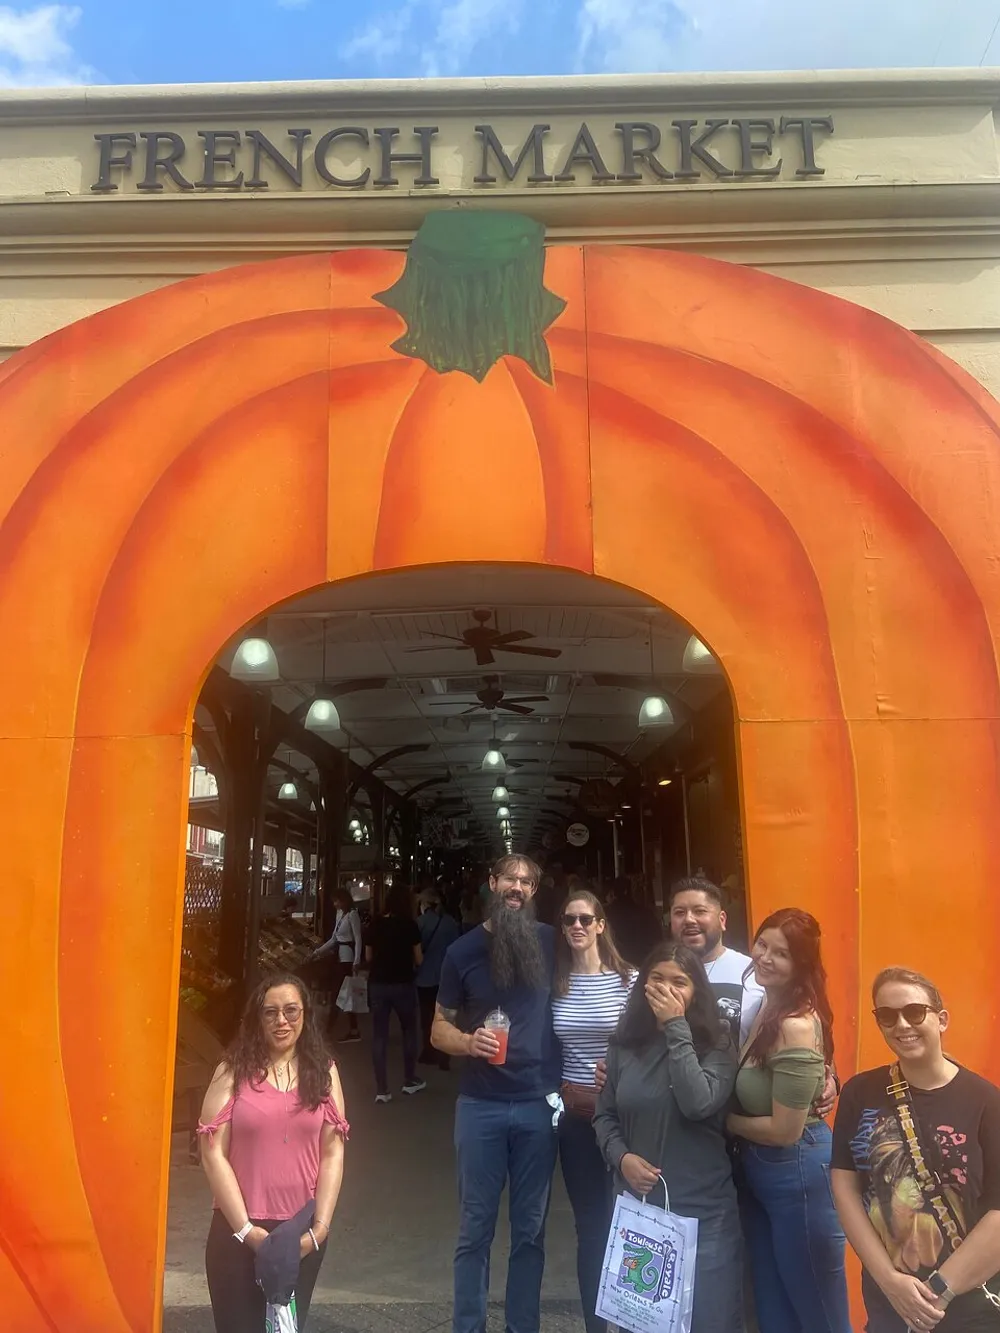 A group of individuals poses for a photo in front of the entrance to the French Market which is adorned with a large decorative pumpkin facade